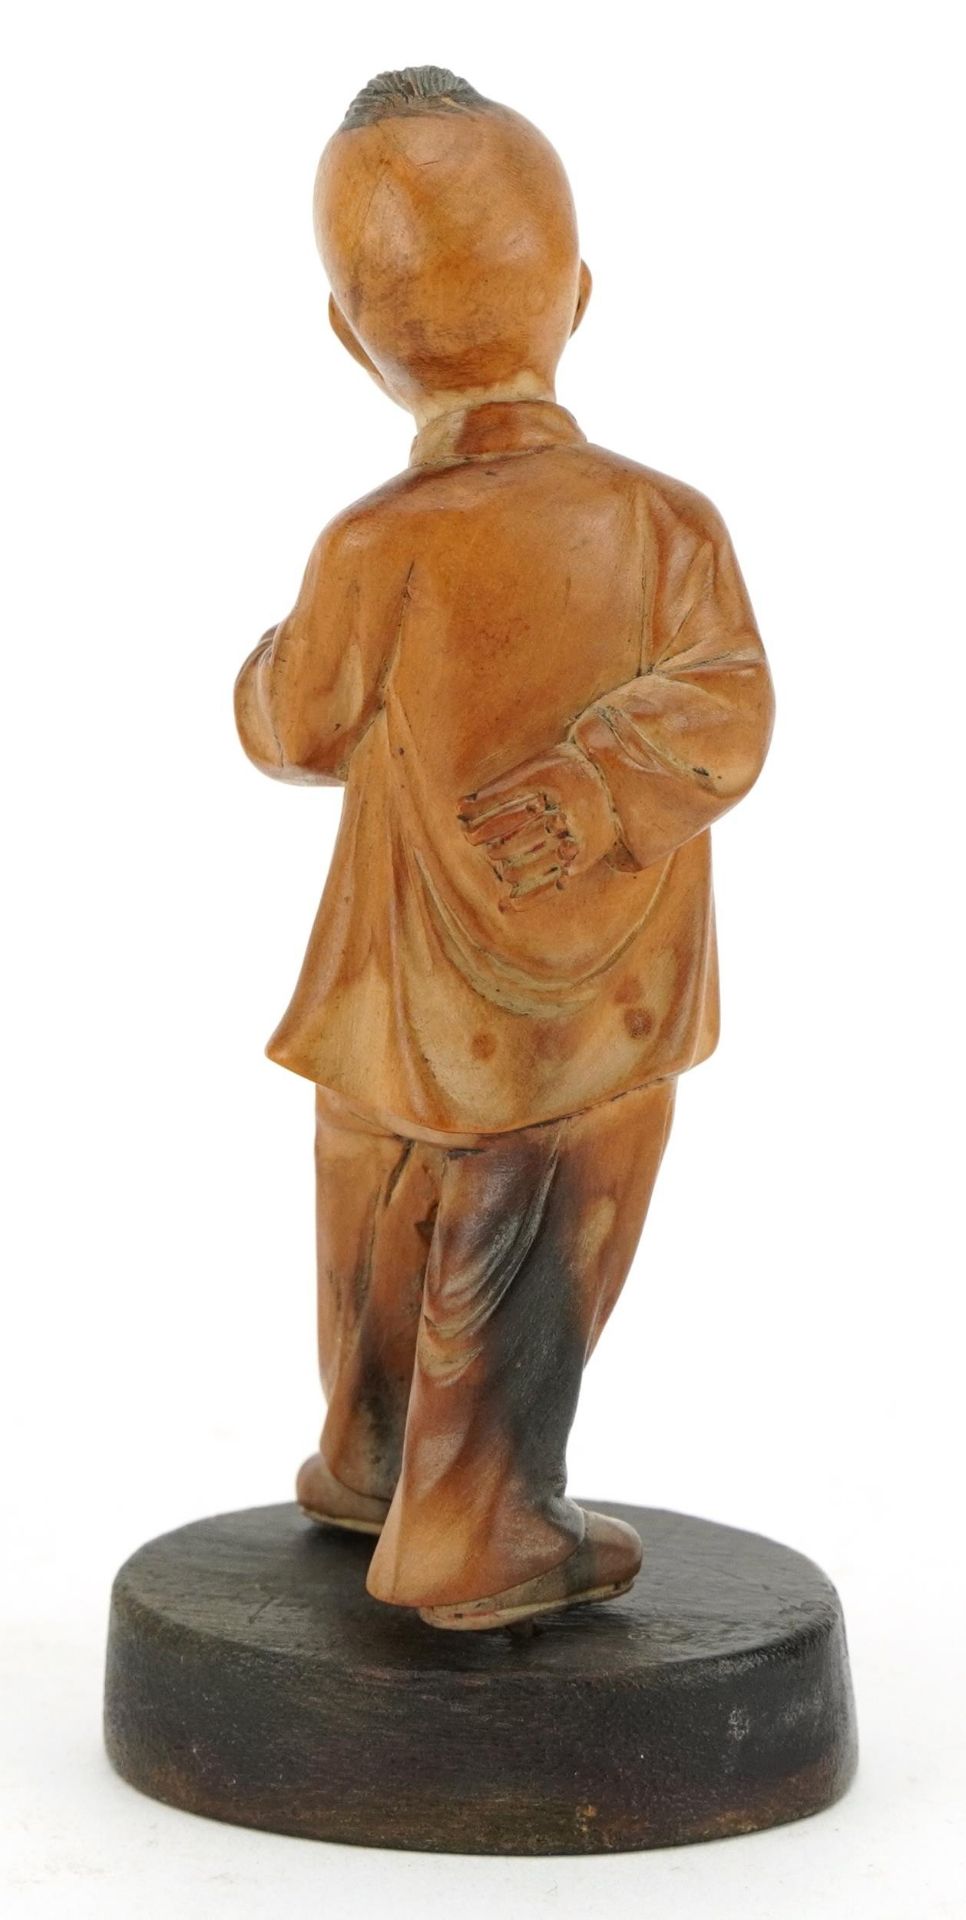 Chinese boxwood carving of a young boy holding a fruit, raised on an oval base, 11cm high - Image 2 of 3